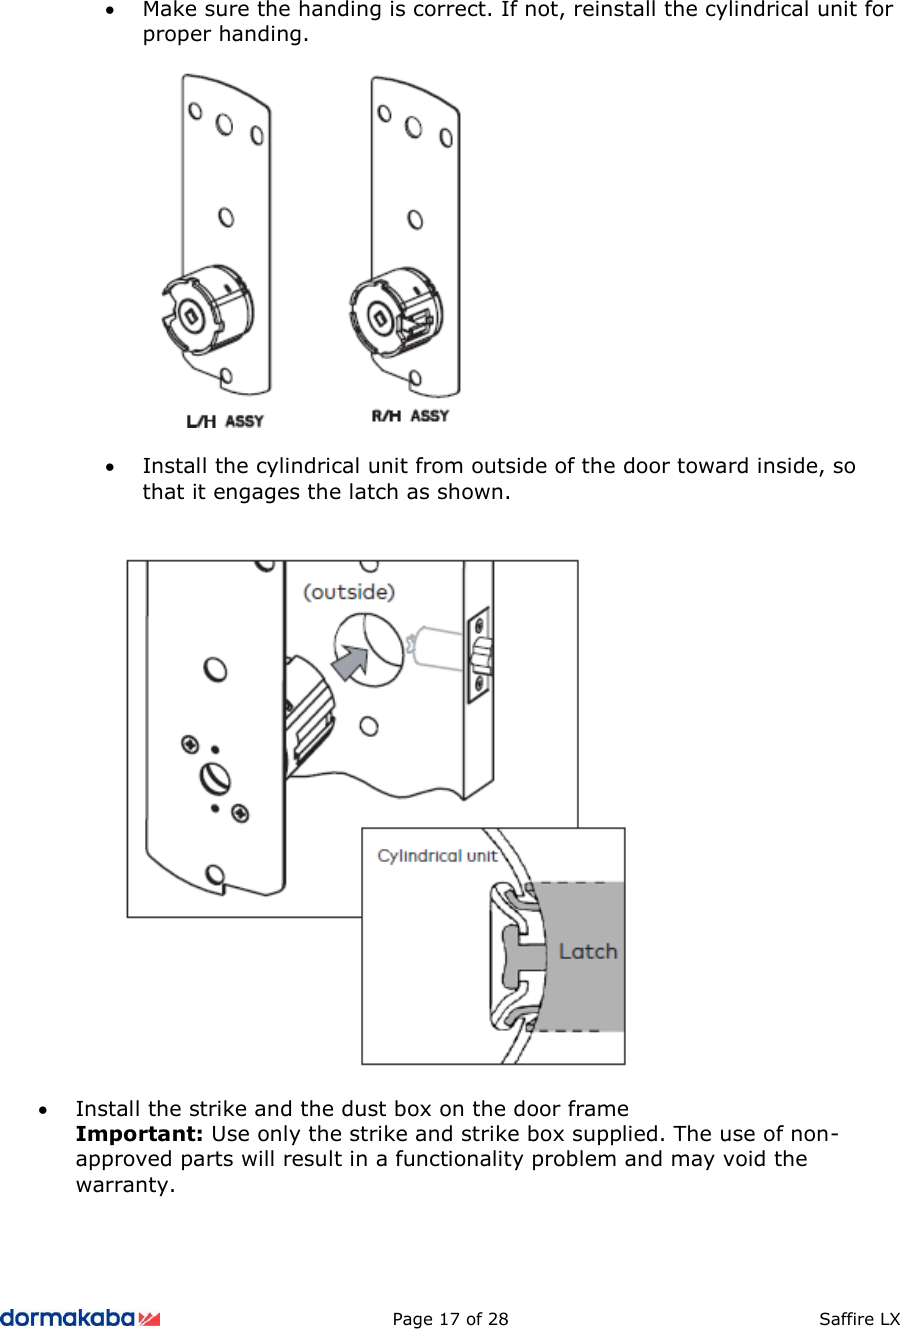          Page 17 of 28  Saffire LX       • Make sure the handing is correct. If not, reinstall the cylindrical unit for proper handing.    • Install the cylindrical unit from outside of the door toward inside, so that it engages the latch as shown.     • Install the strike and the dust box on the door frame Important: Use only the strike and strike box supplied. The use of non-approved parts will result in a functionality problem and may void the warranty.  